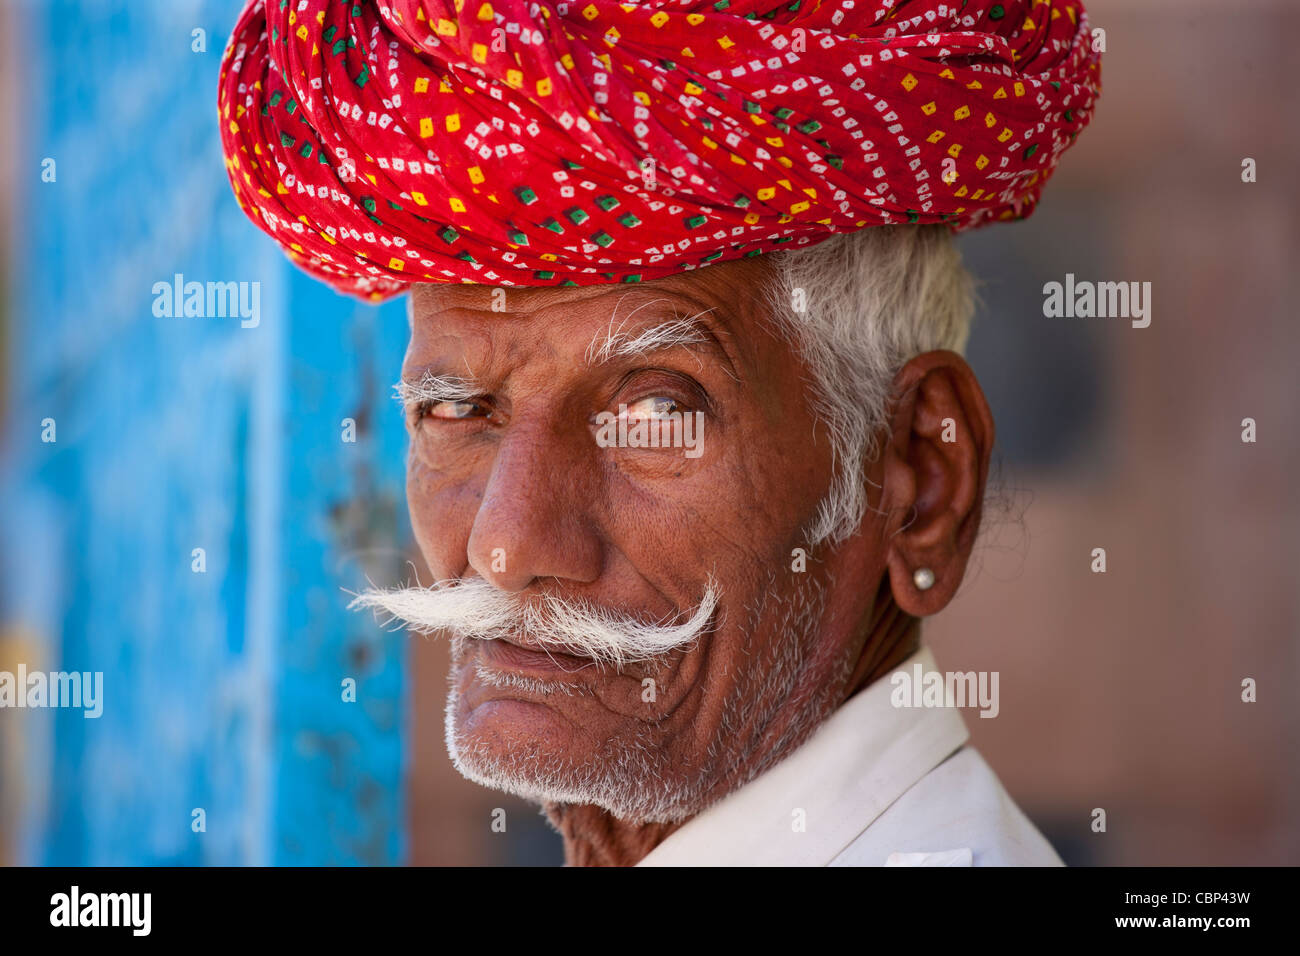 Indian man with traditional Rajasthani turban in Narlai village in Rajasthan, Northern India Stock Photo